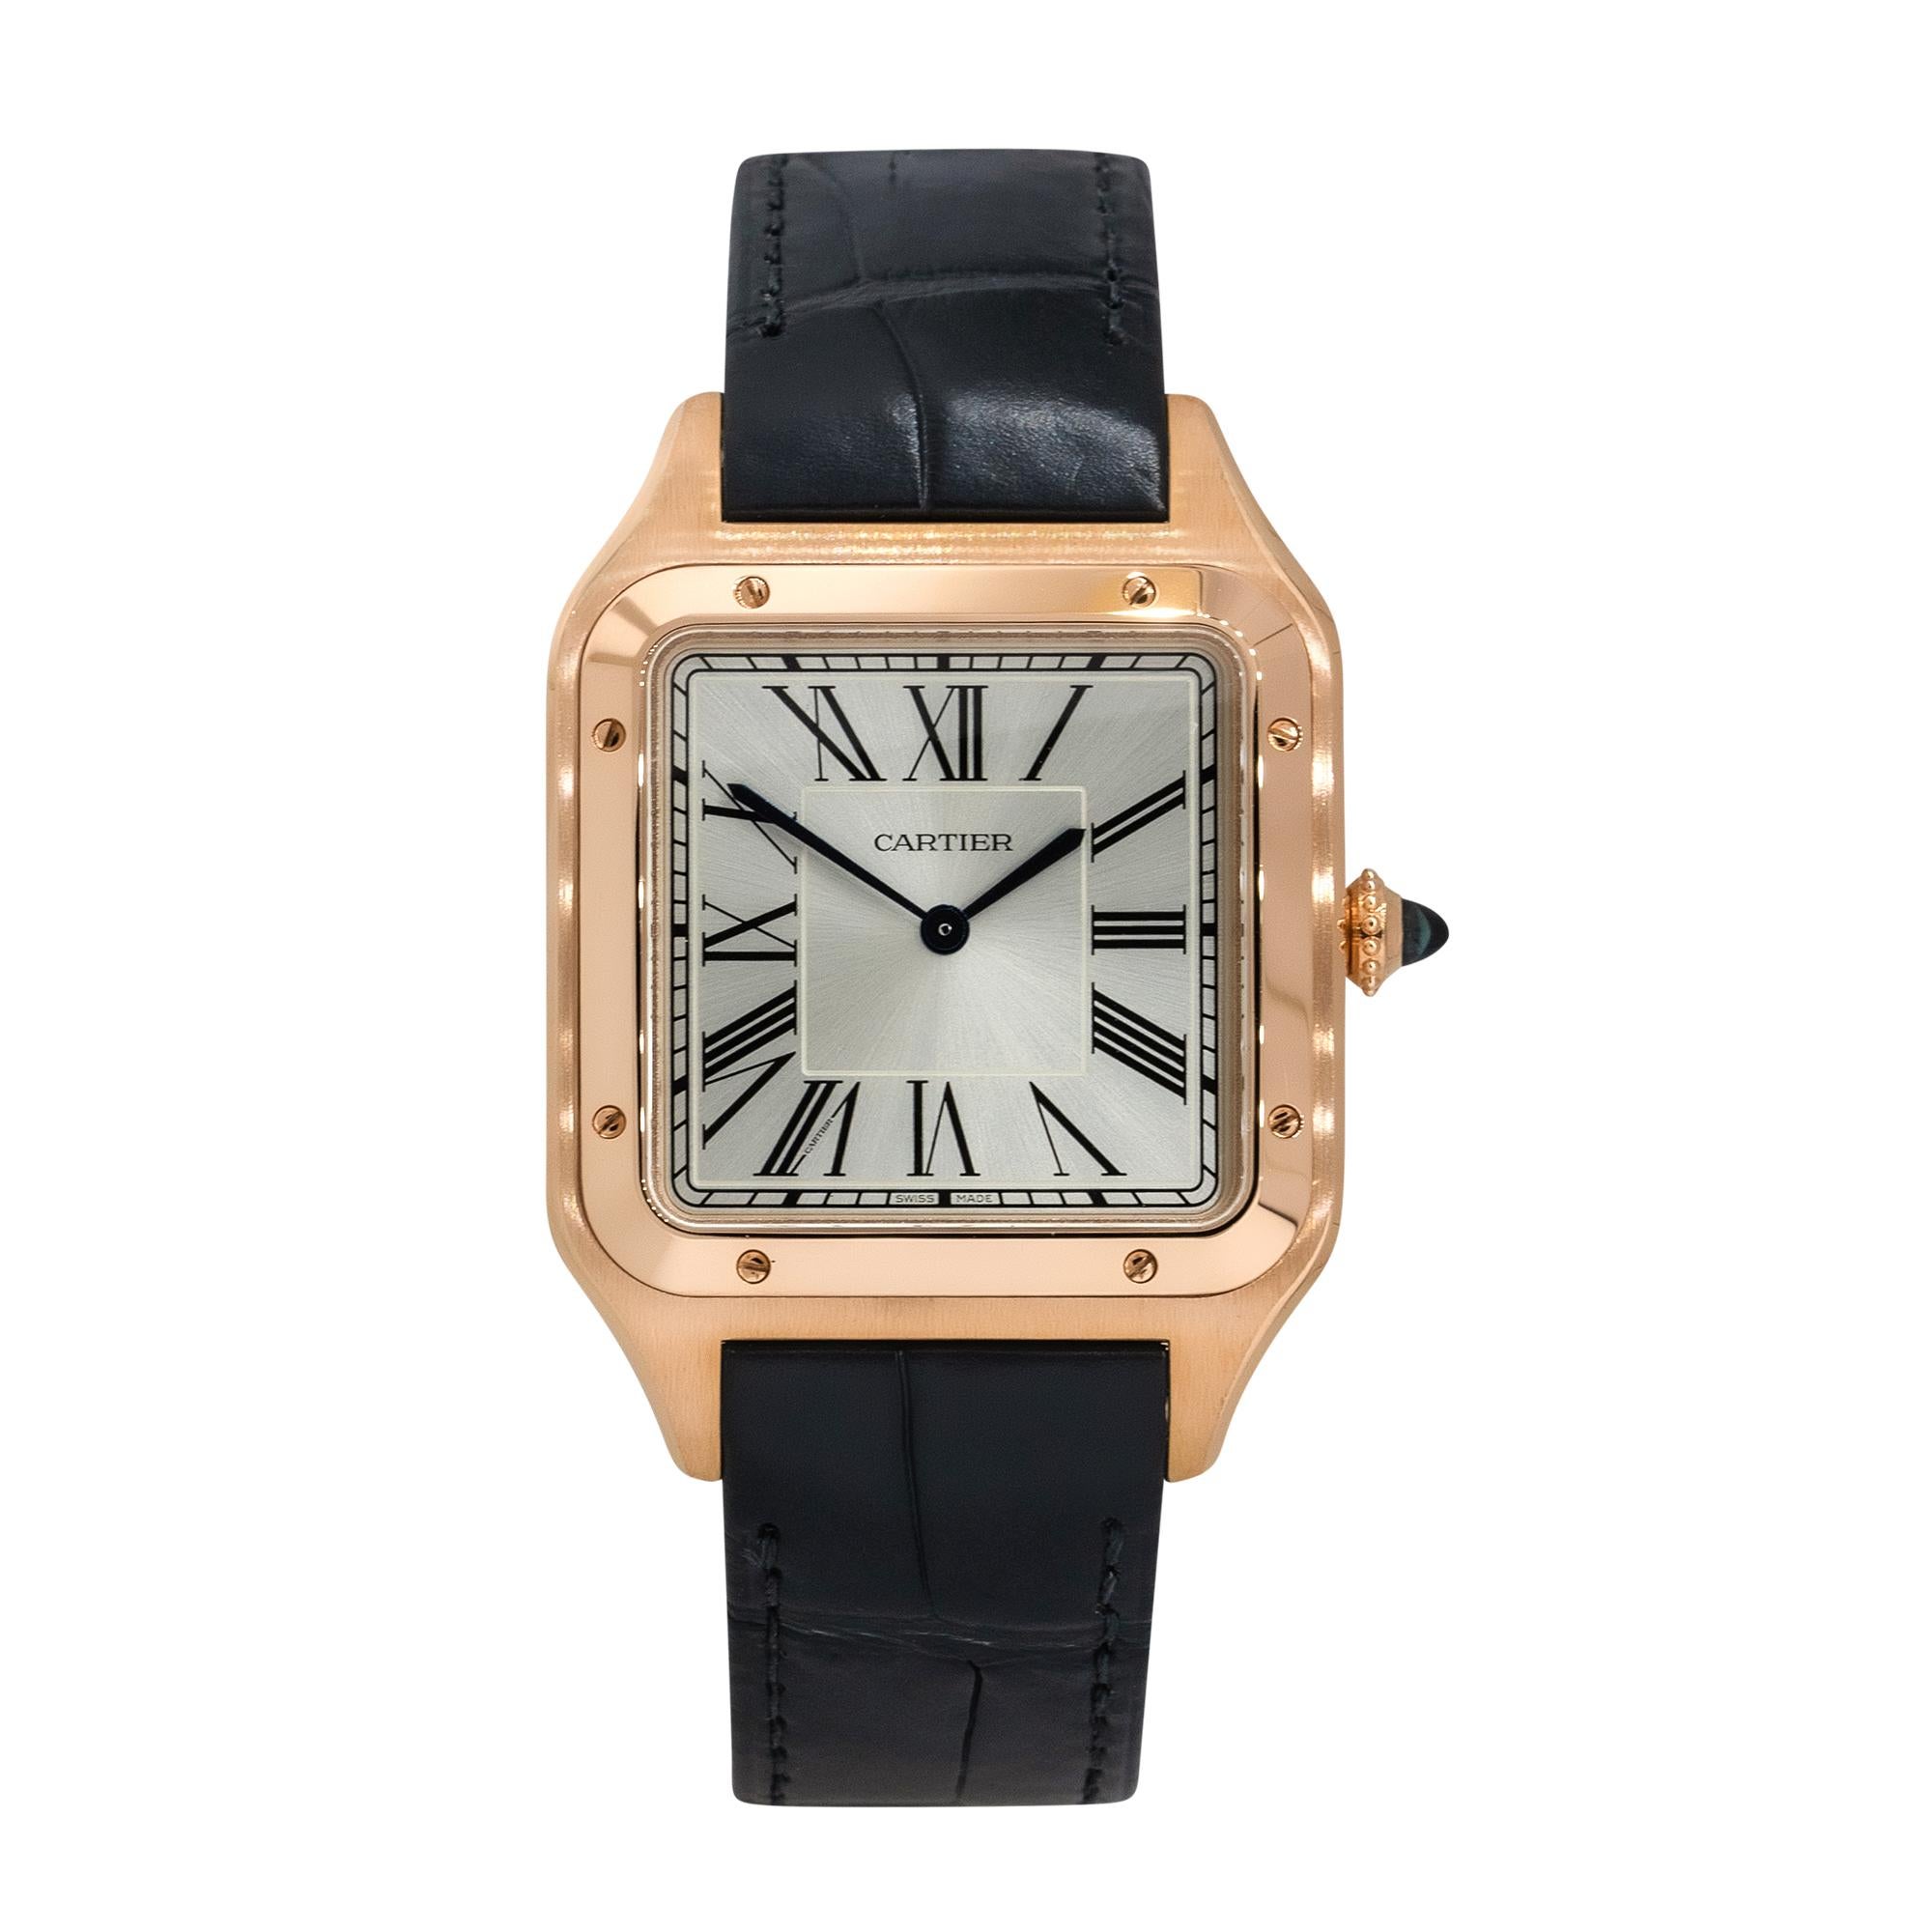 Brand: Cartier
Model: Santos Dumont XL
Reference Number: 4307
Case Material: 18k Rose Gold
Dial: Silver chronograph dial with blue hands and black roman numerals
Bezel: 18k Rose gold smooth bezel
Case Measurements: 46.6 mm x 33.9 mm
Bracelet: